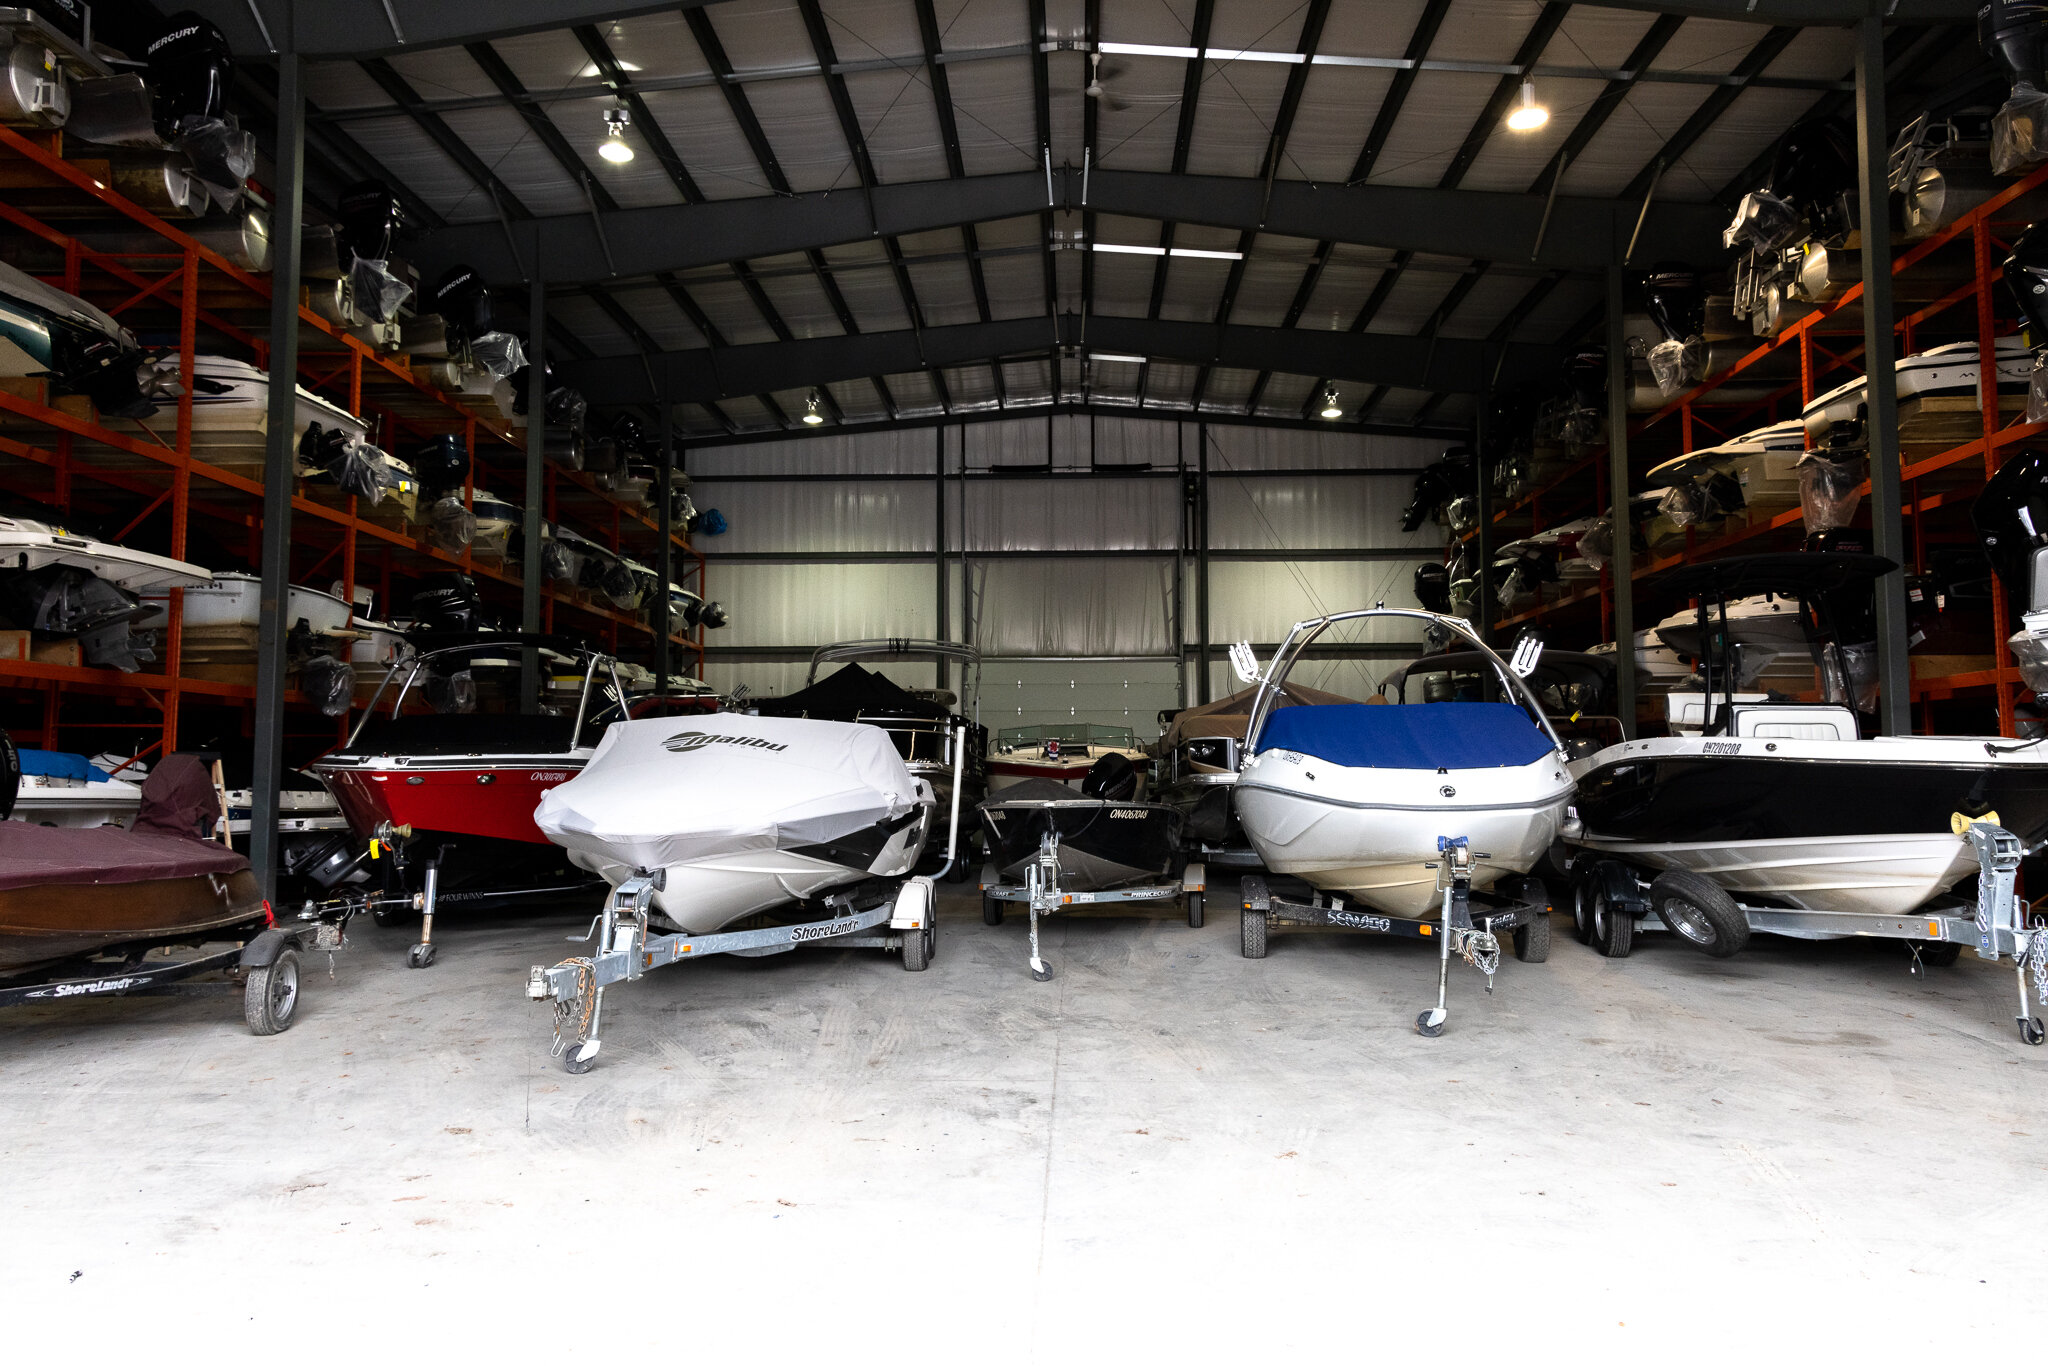 Winter Storage, Boat Repairs and service, New Fuel Dock — Old Mill Marina